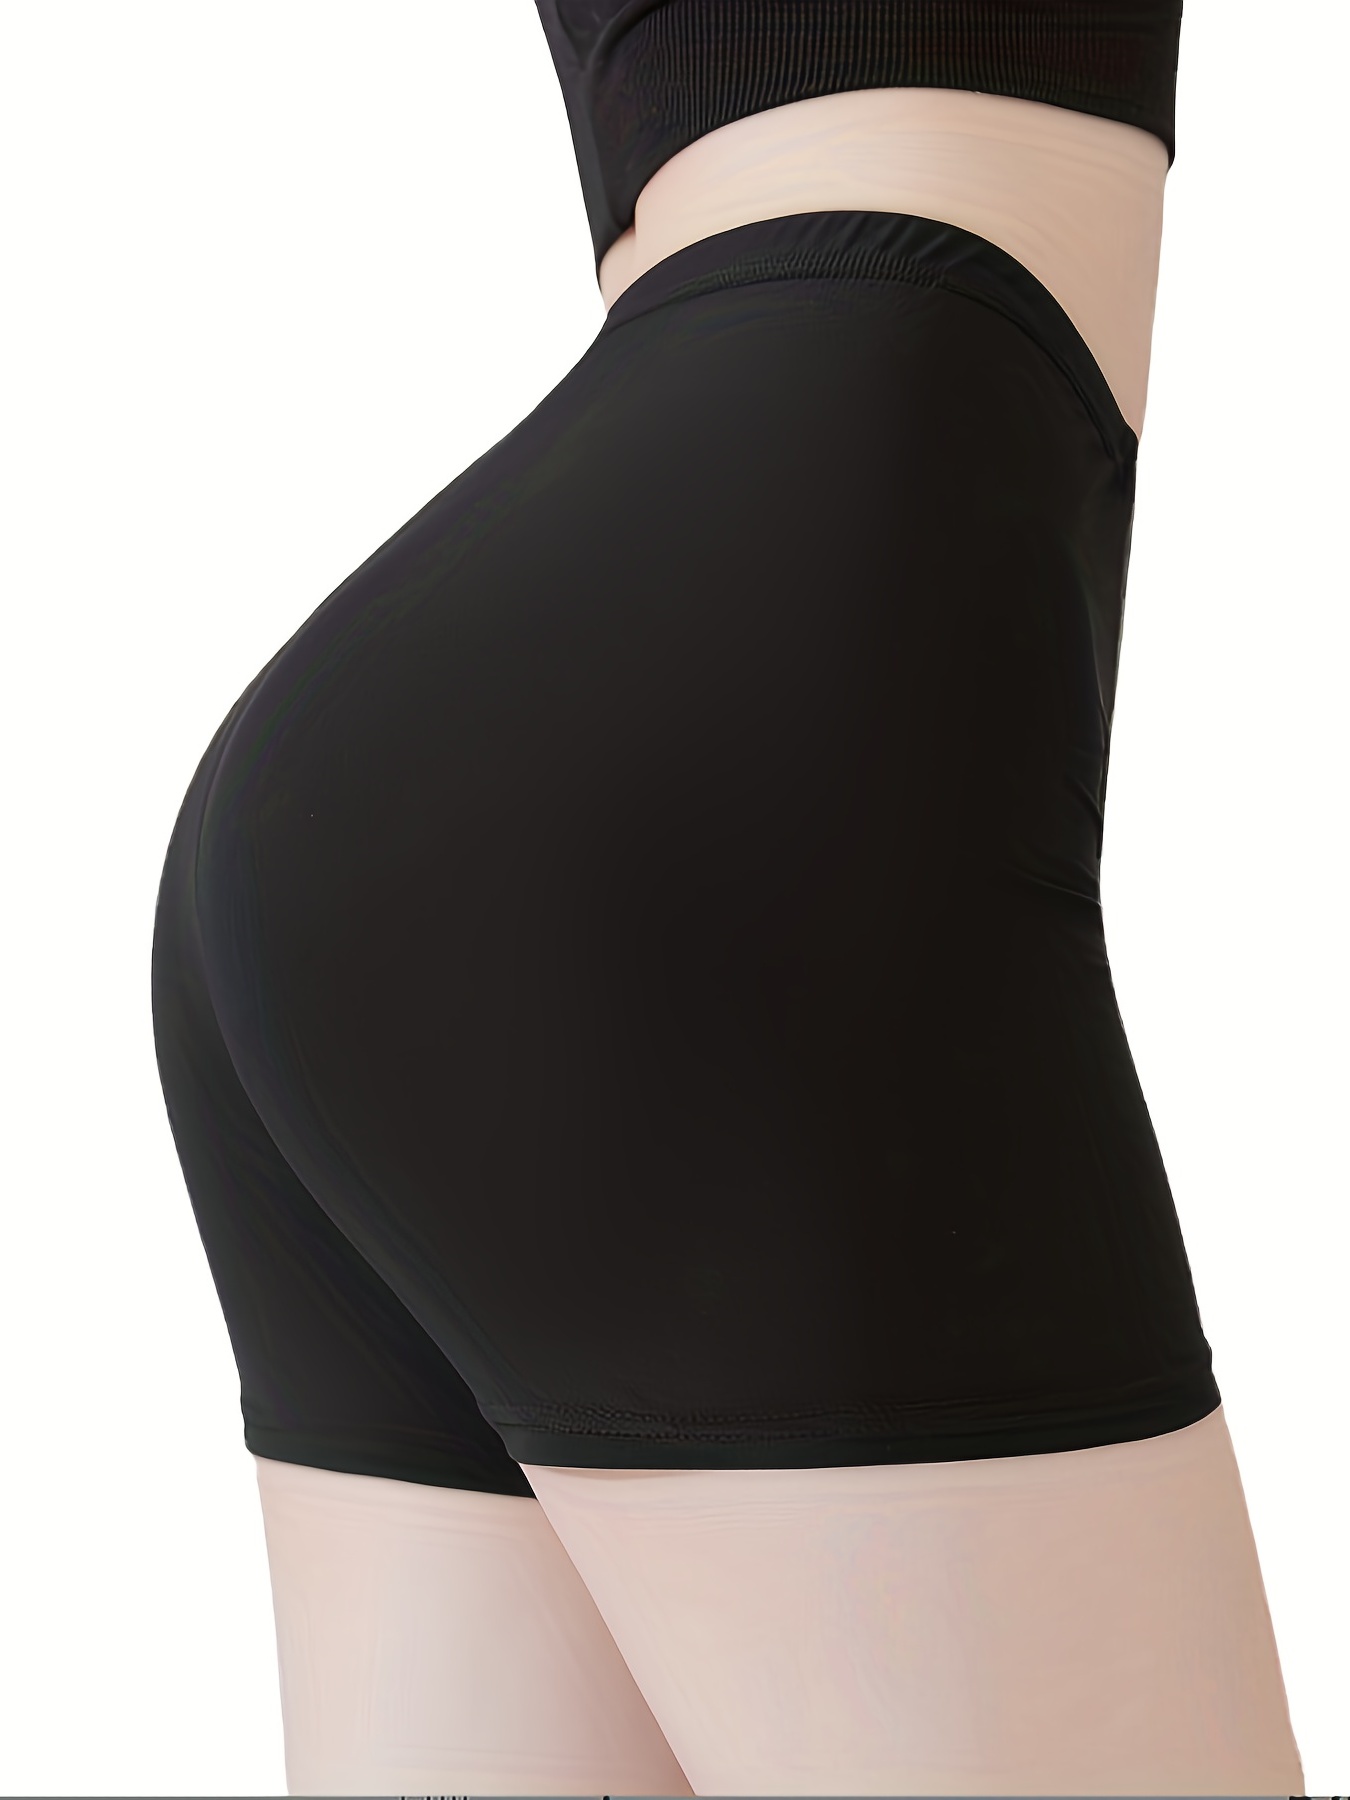 Solid Seamless Double-layer Safety Shorts With Front Crotch, Anti Chafing  Safety Leggings Under Dress, Women's Summer Clothing